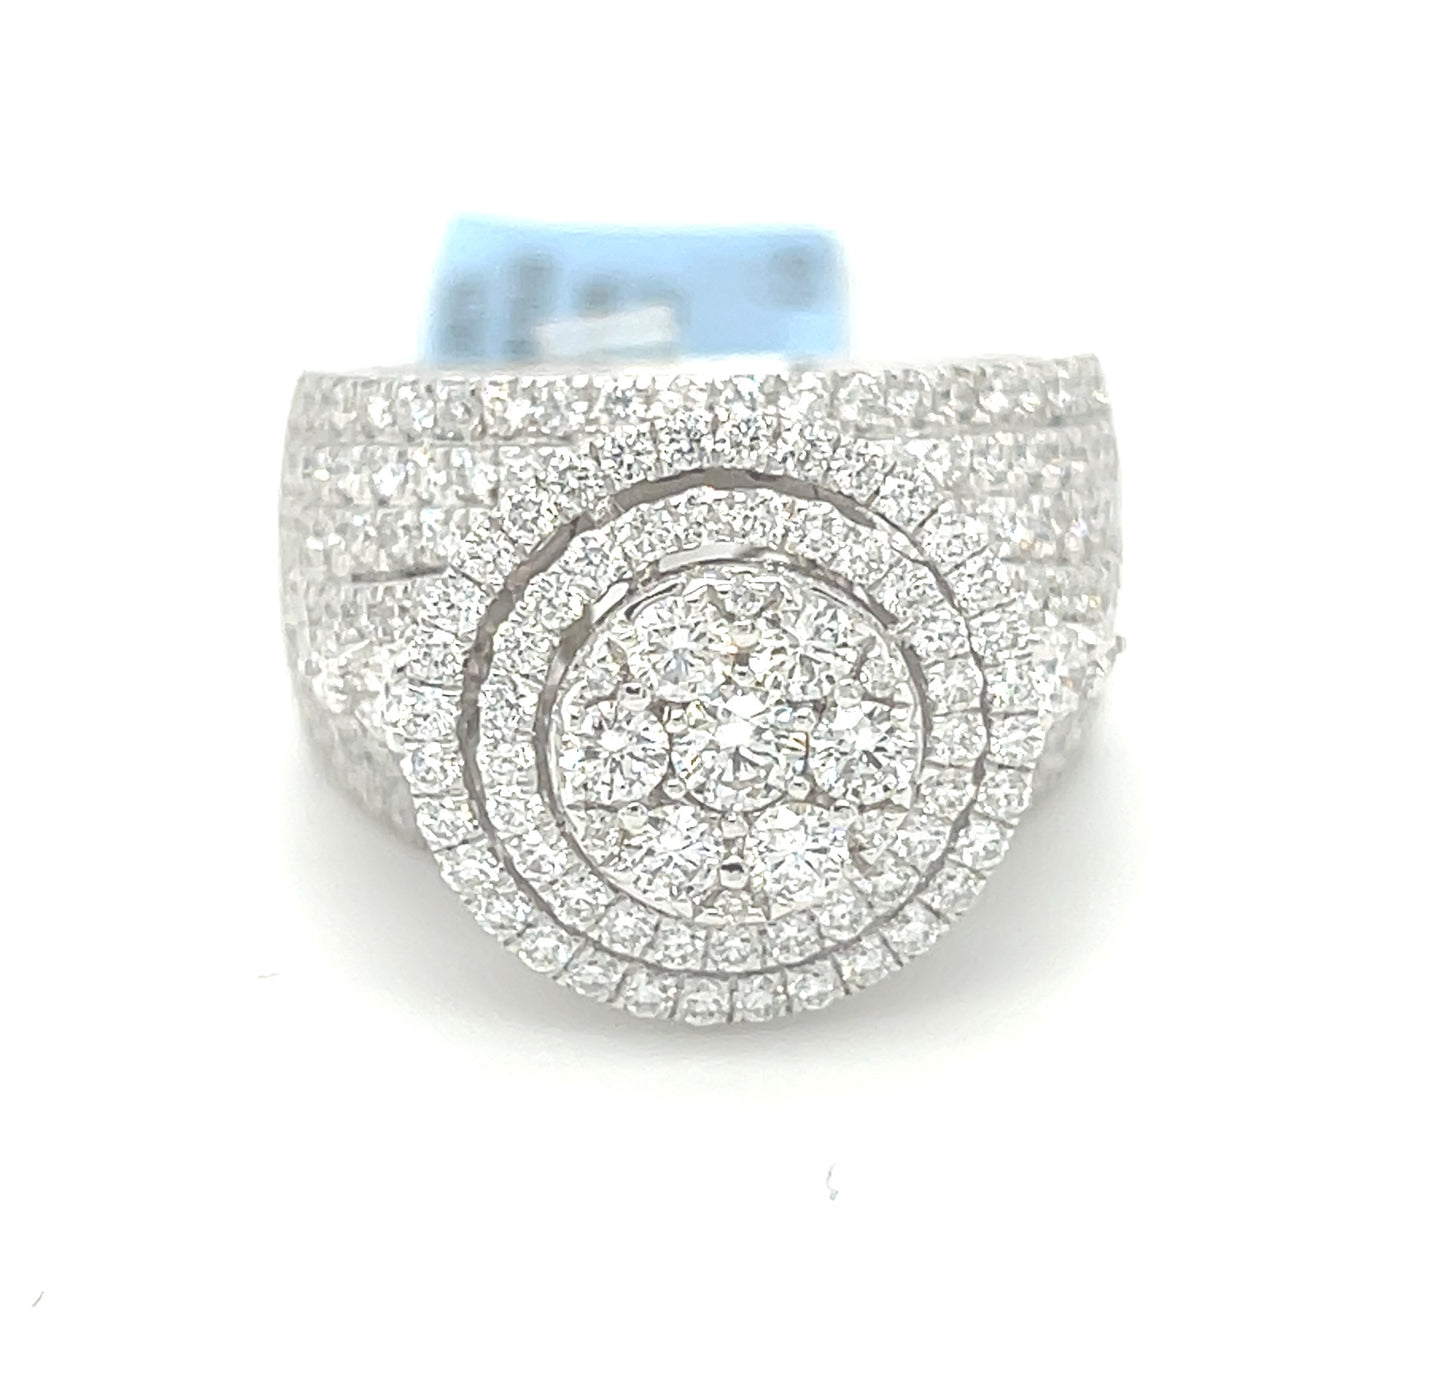 14KW Gold 2.50ct Diamond Cluster Halo Ring Si1, G